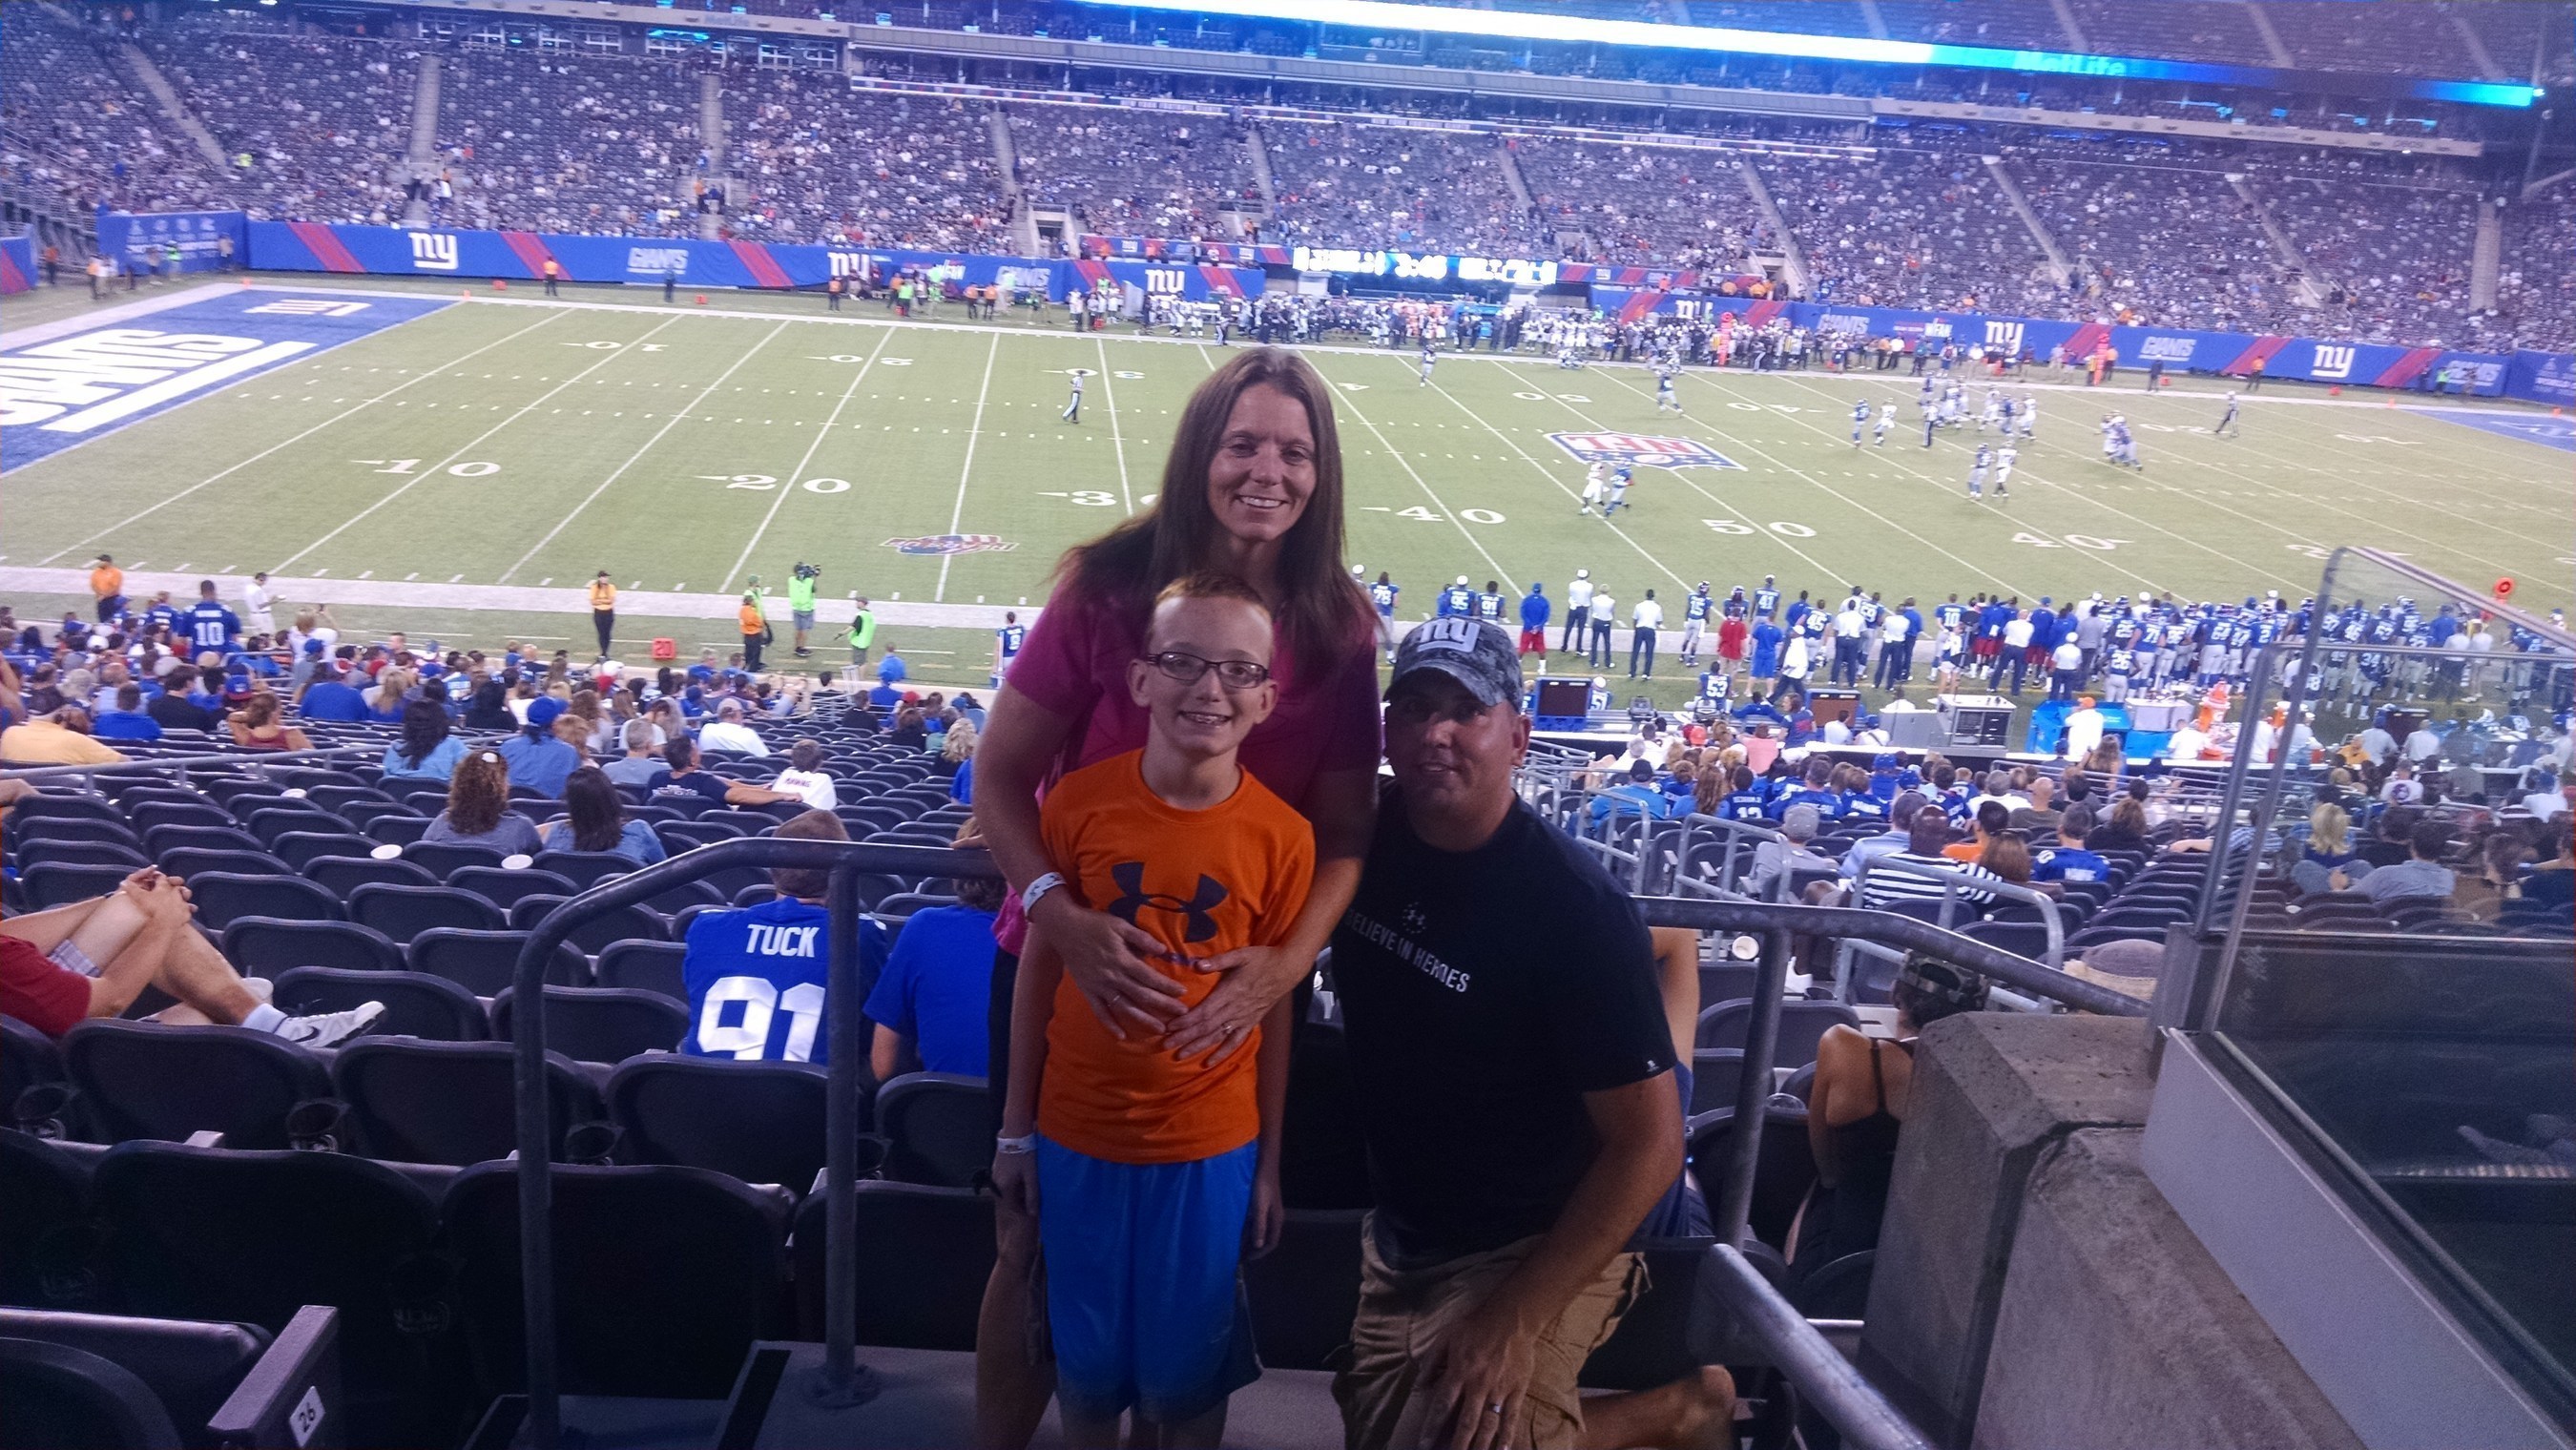 The Fiorillo Family at son Troy's first NY Giants game at MET LIFE Stadium. Applause Tickets participates in the NATB Gives Back Charity Program which sends children with health challenges and their families staying at Ronald McDonald Houses to NFL games around the country.